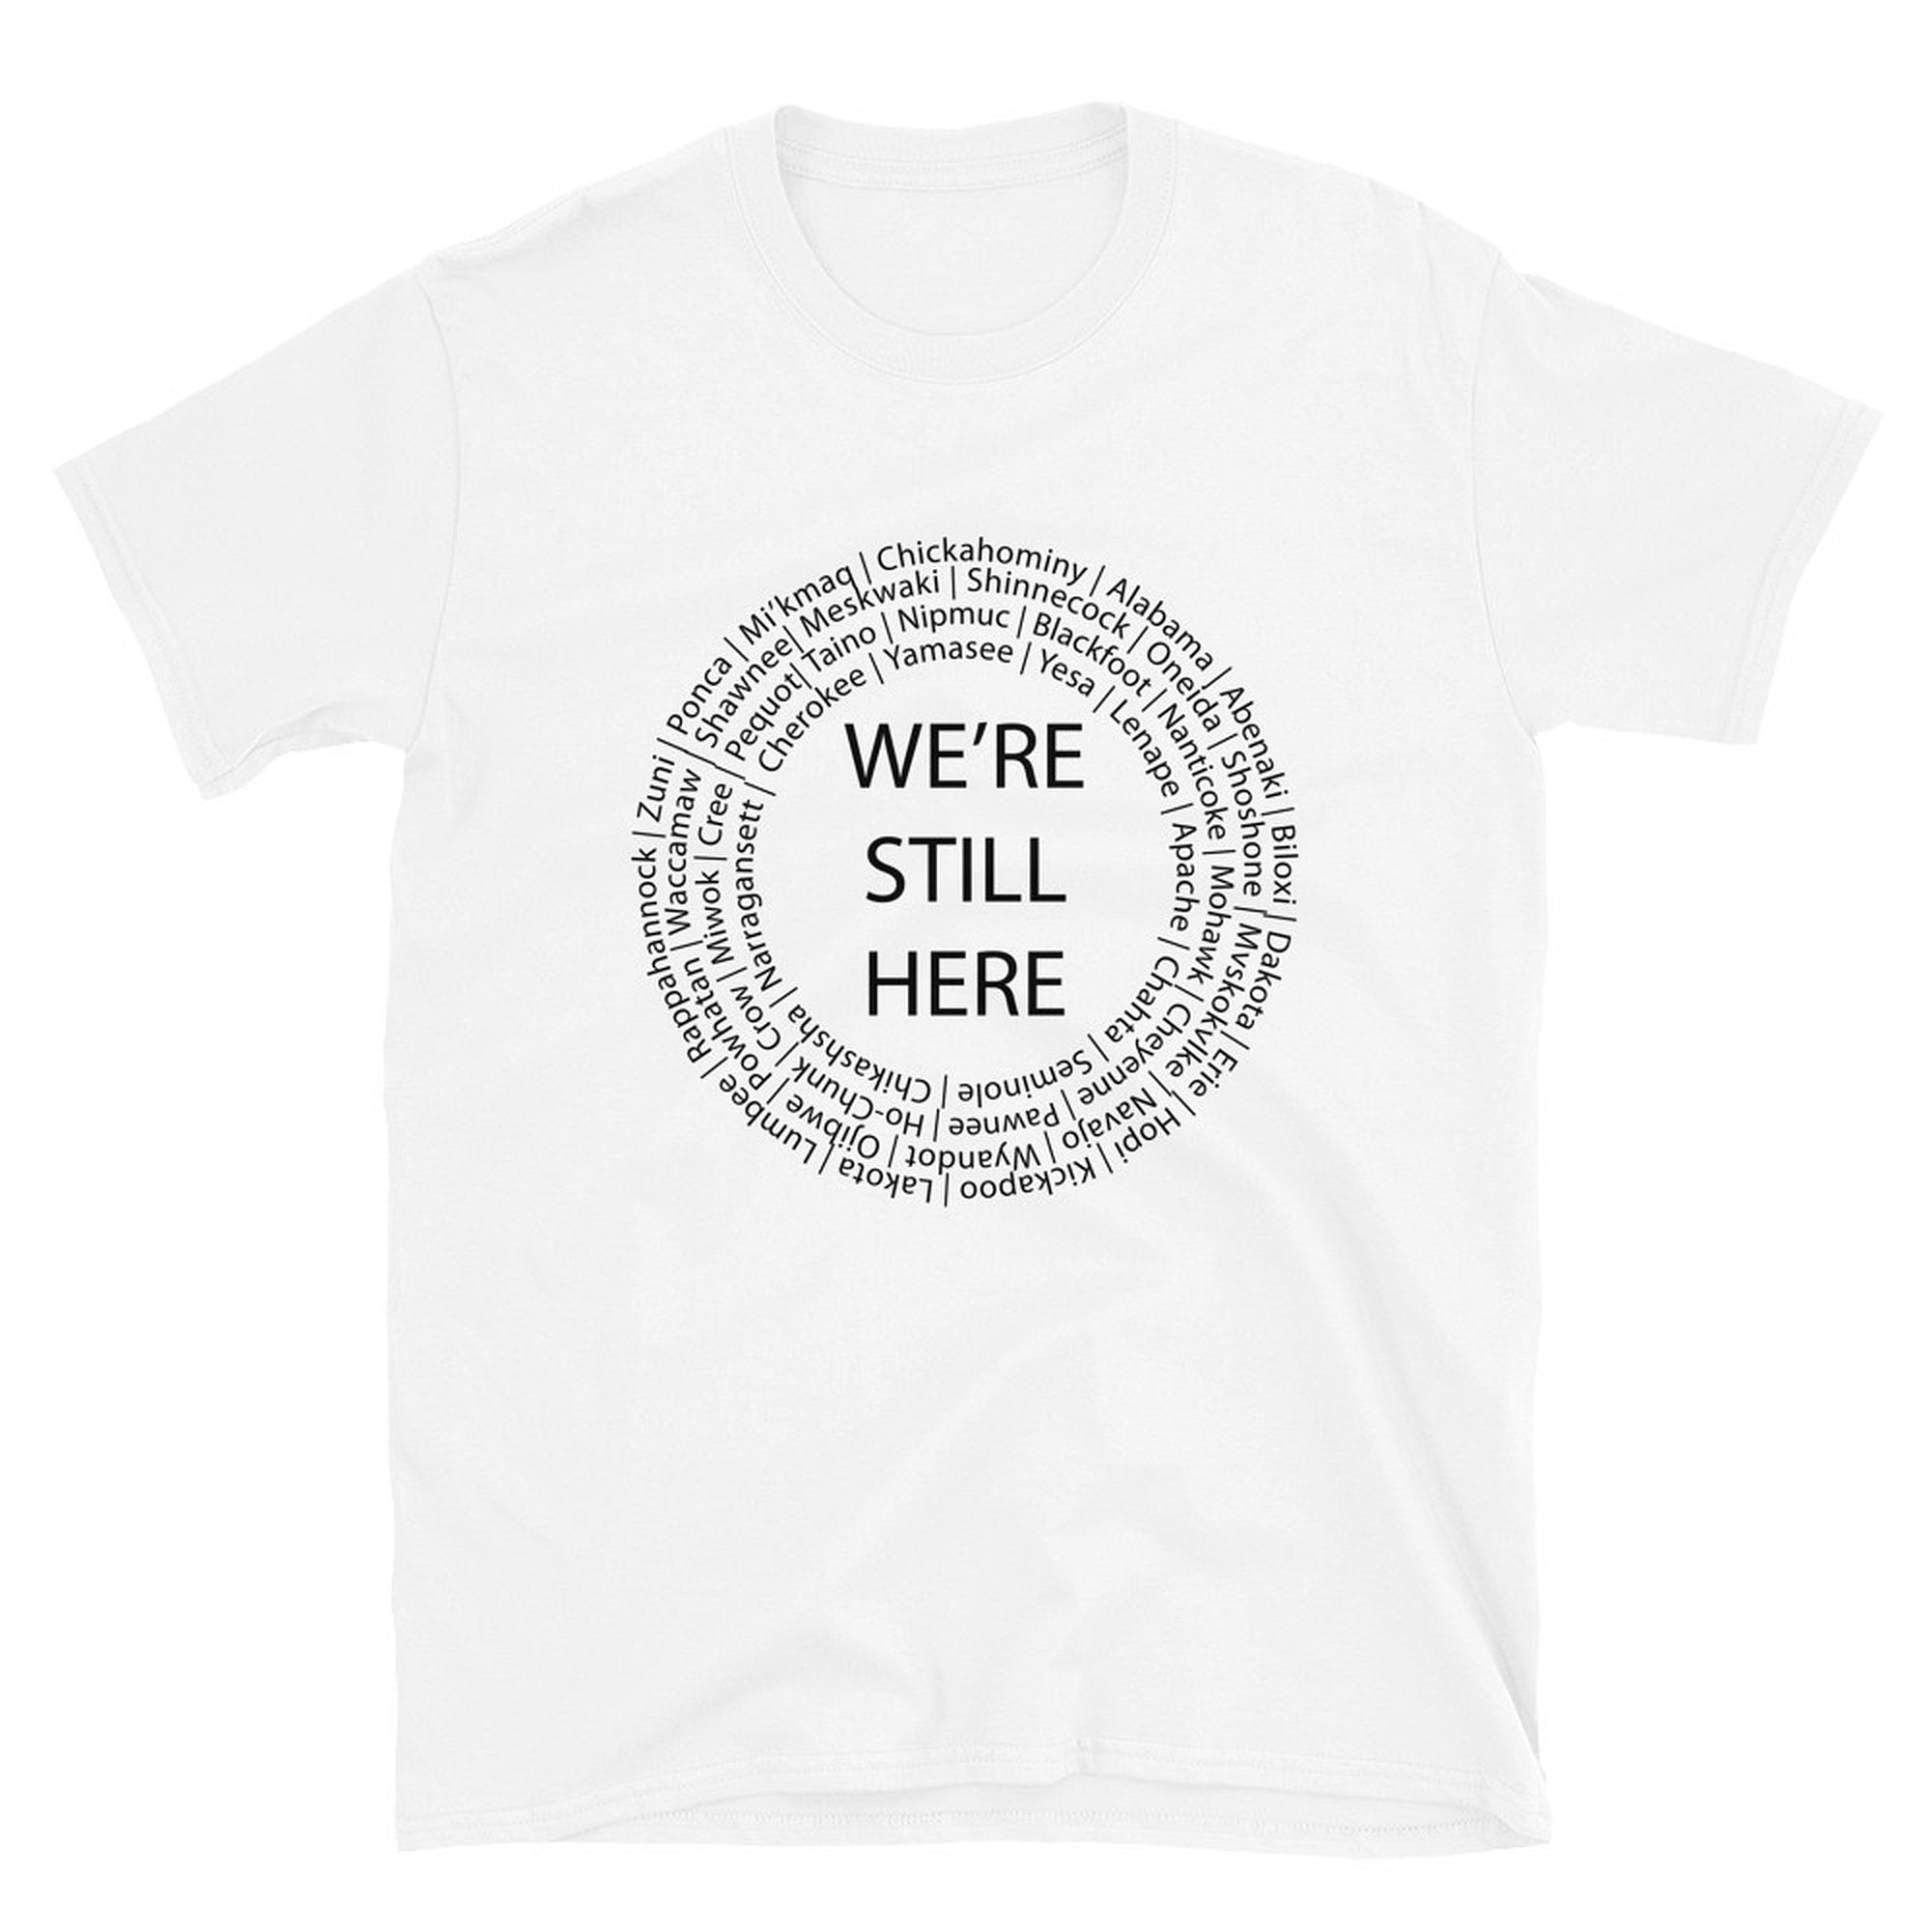 We're Still Here White T-shirt by Chained Dolls